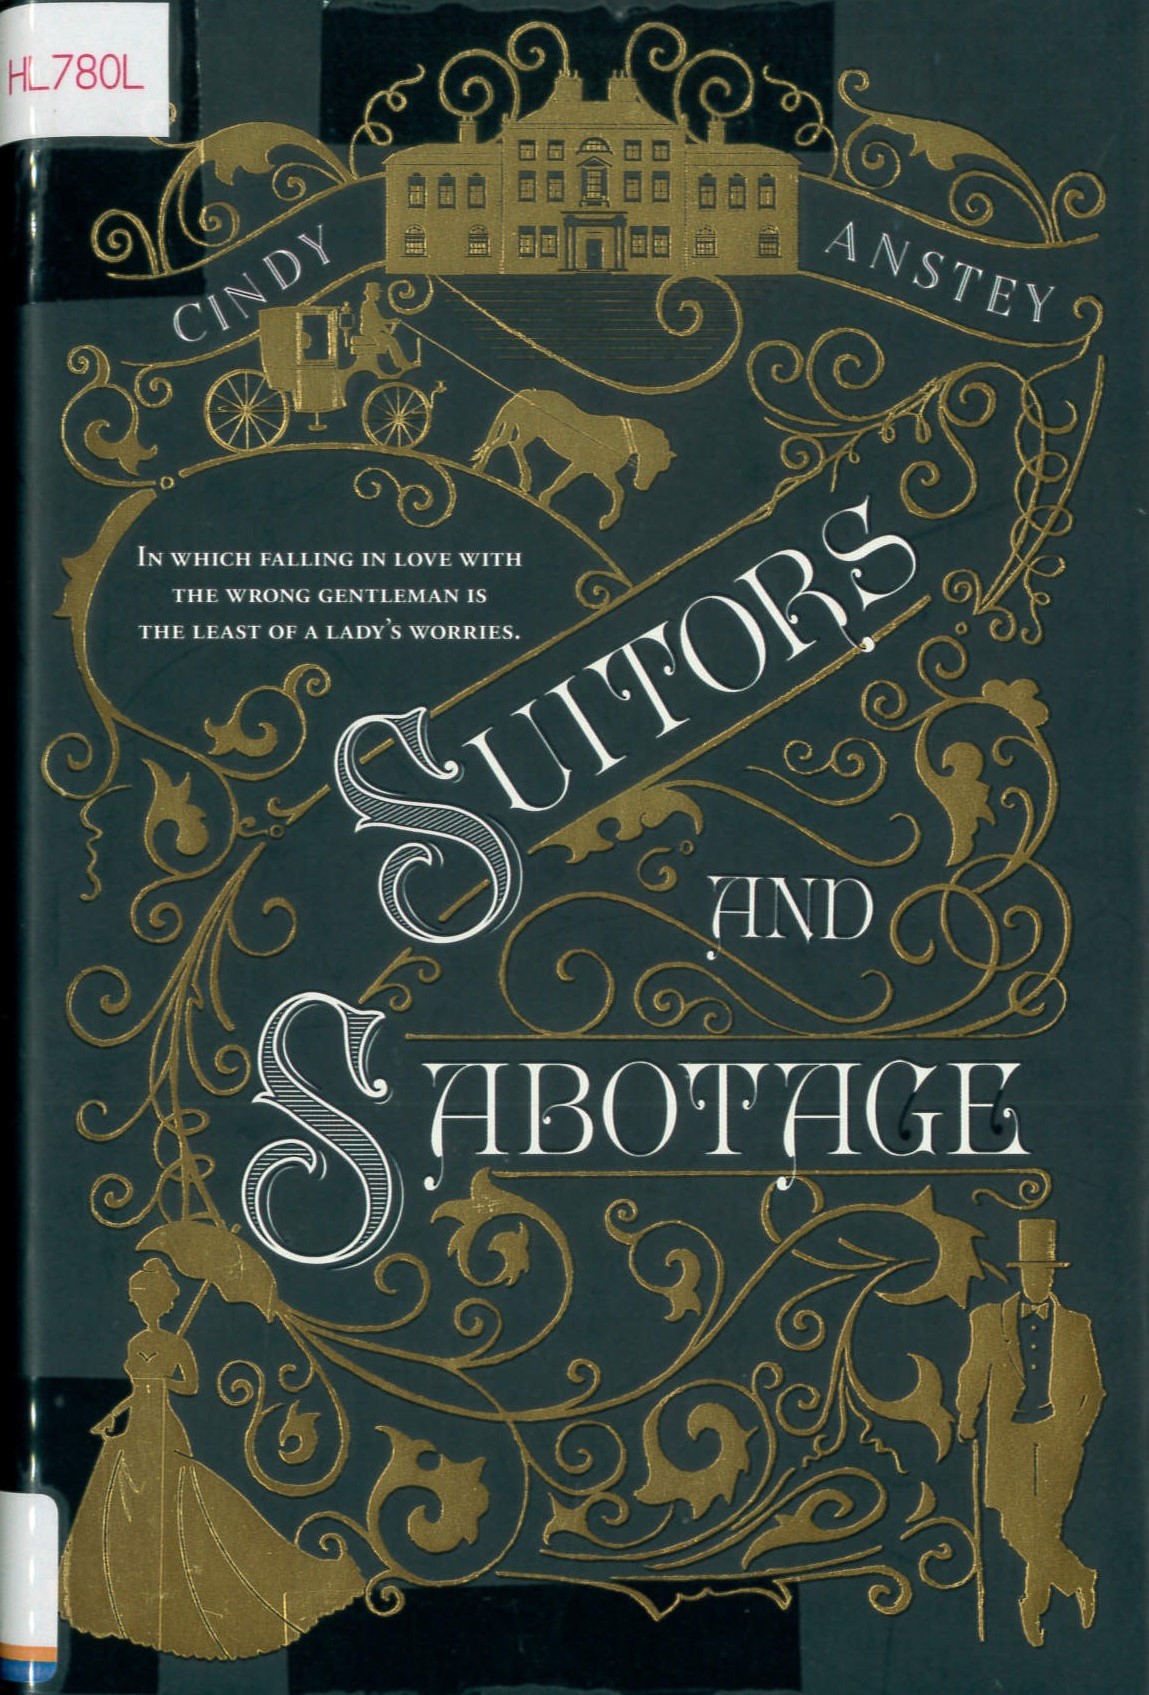 Suitors and sabotage /